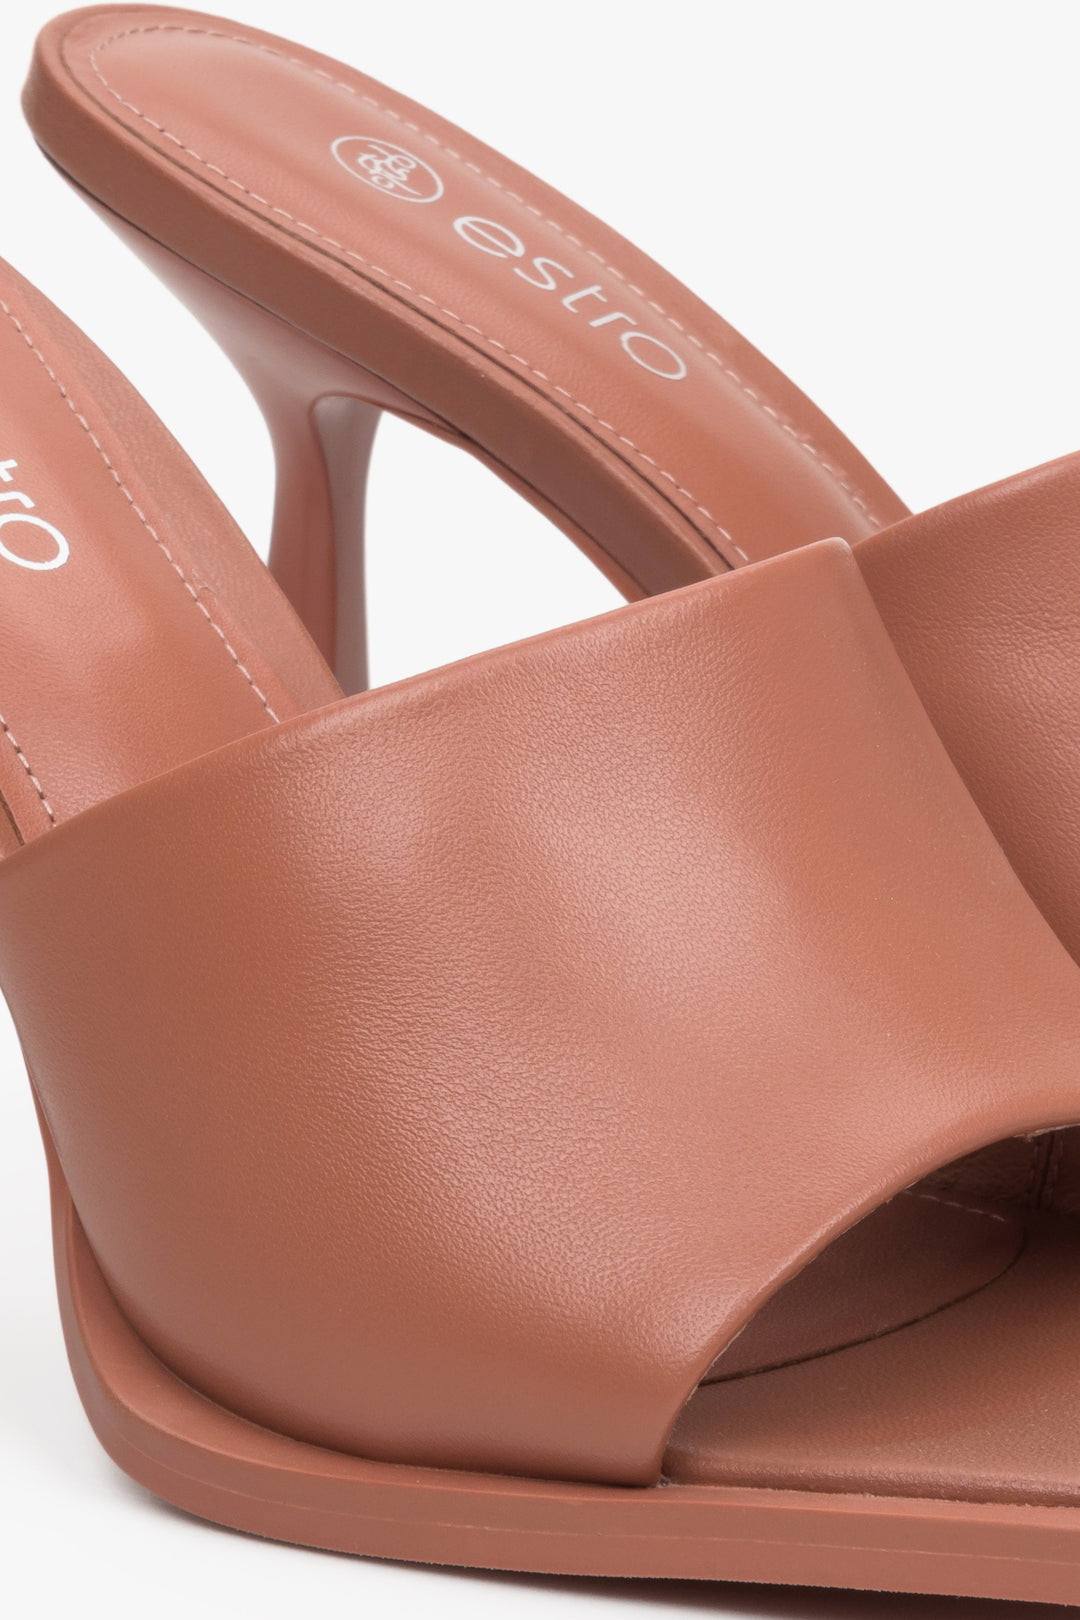 Estro brown leather stiletto mules for women - a close up on details.